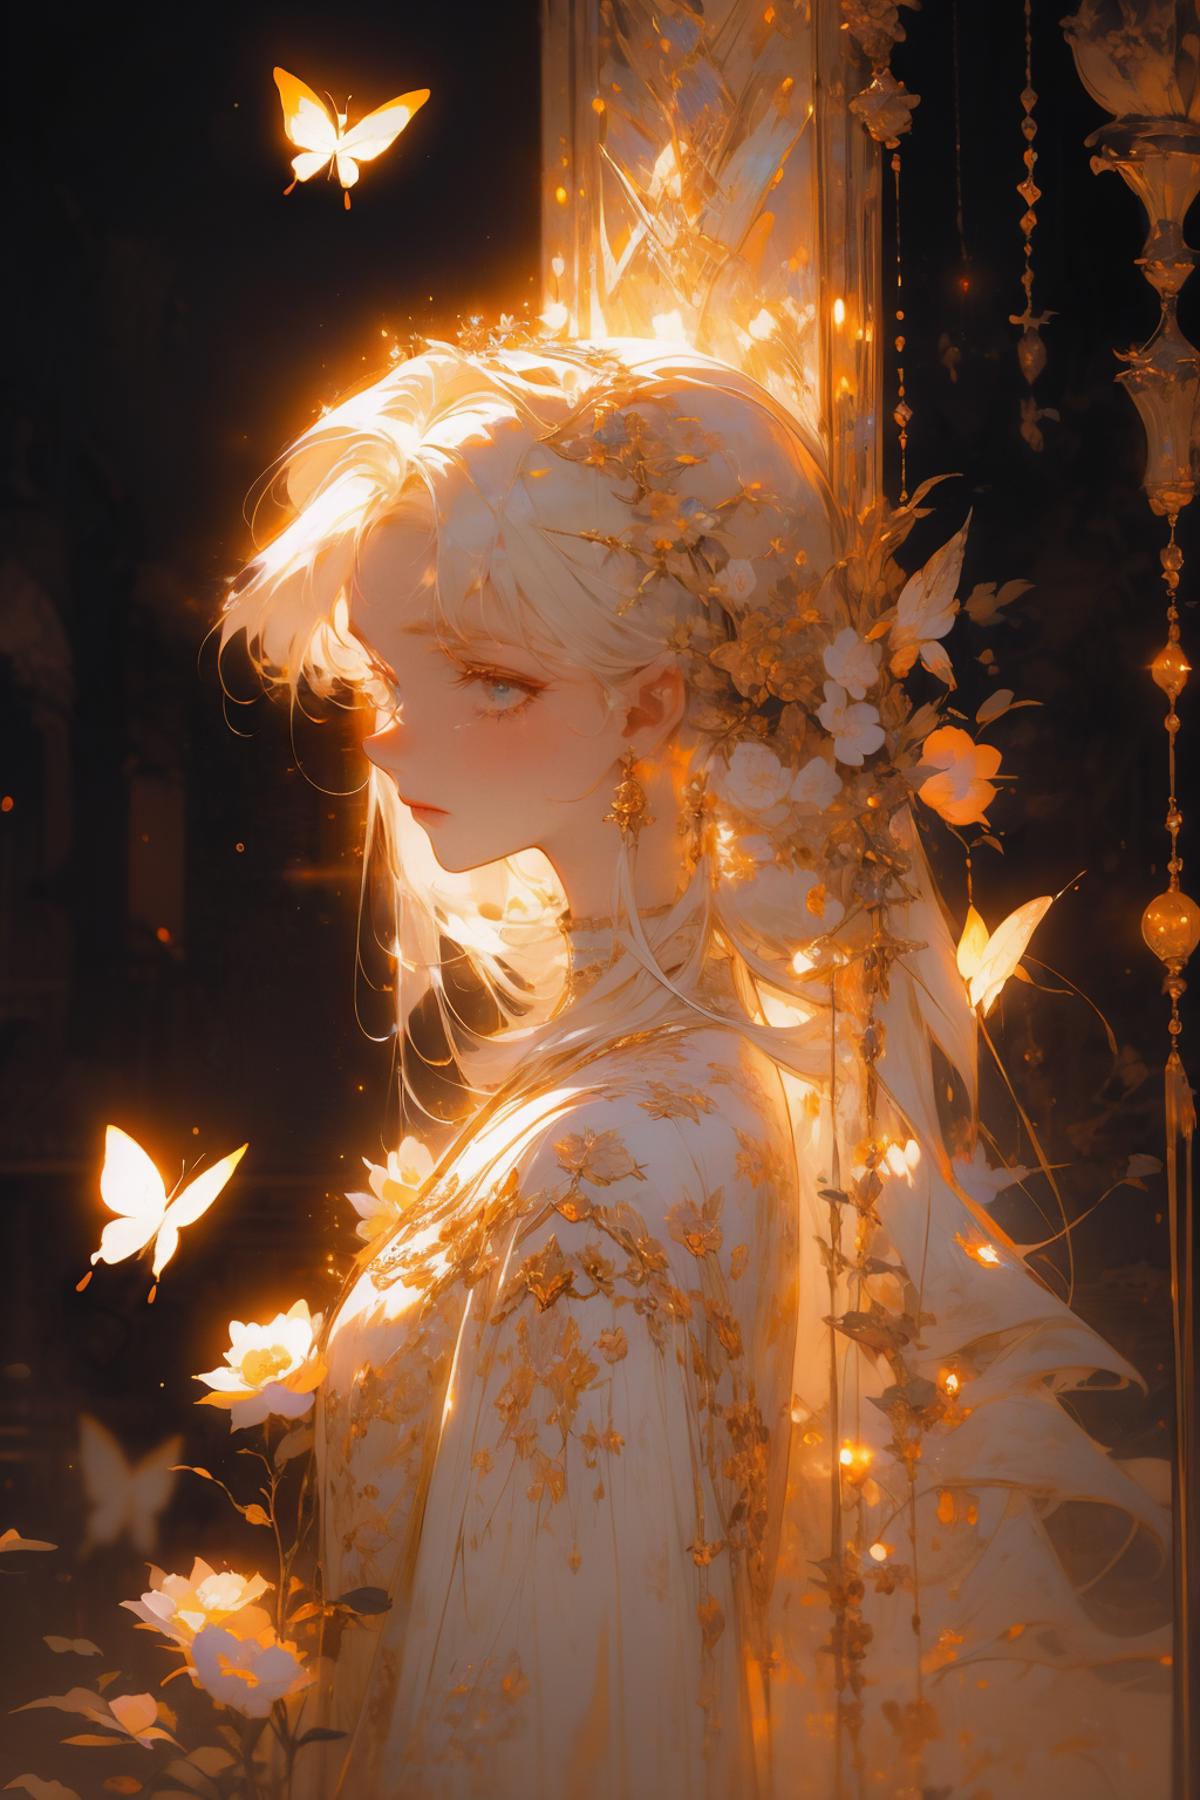 An illustration of a woman with white hair, wearing a white dress, surrounded by a golden aura and butterflies.